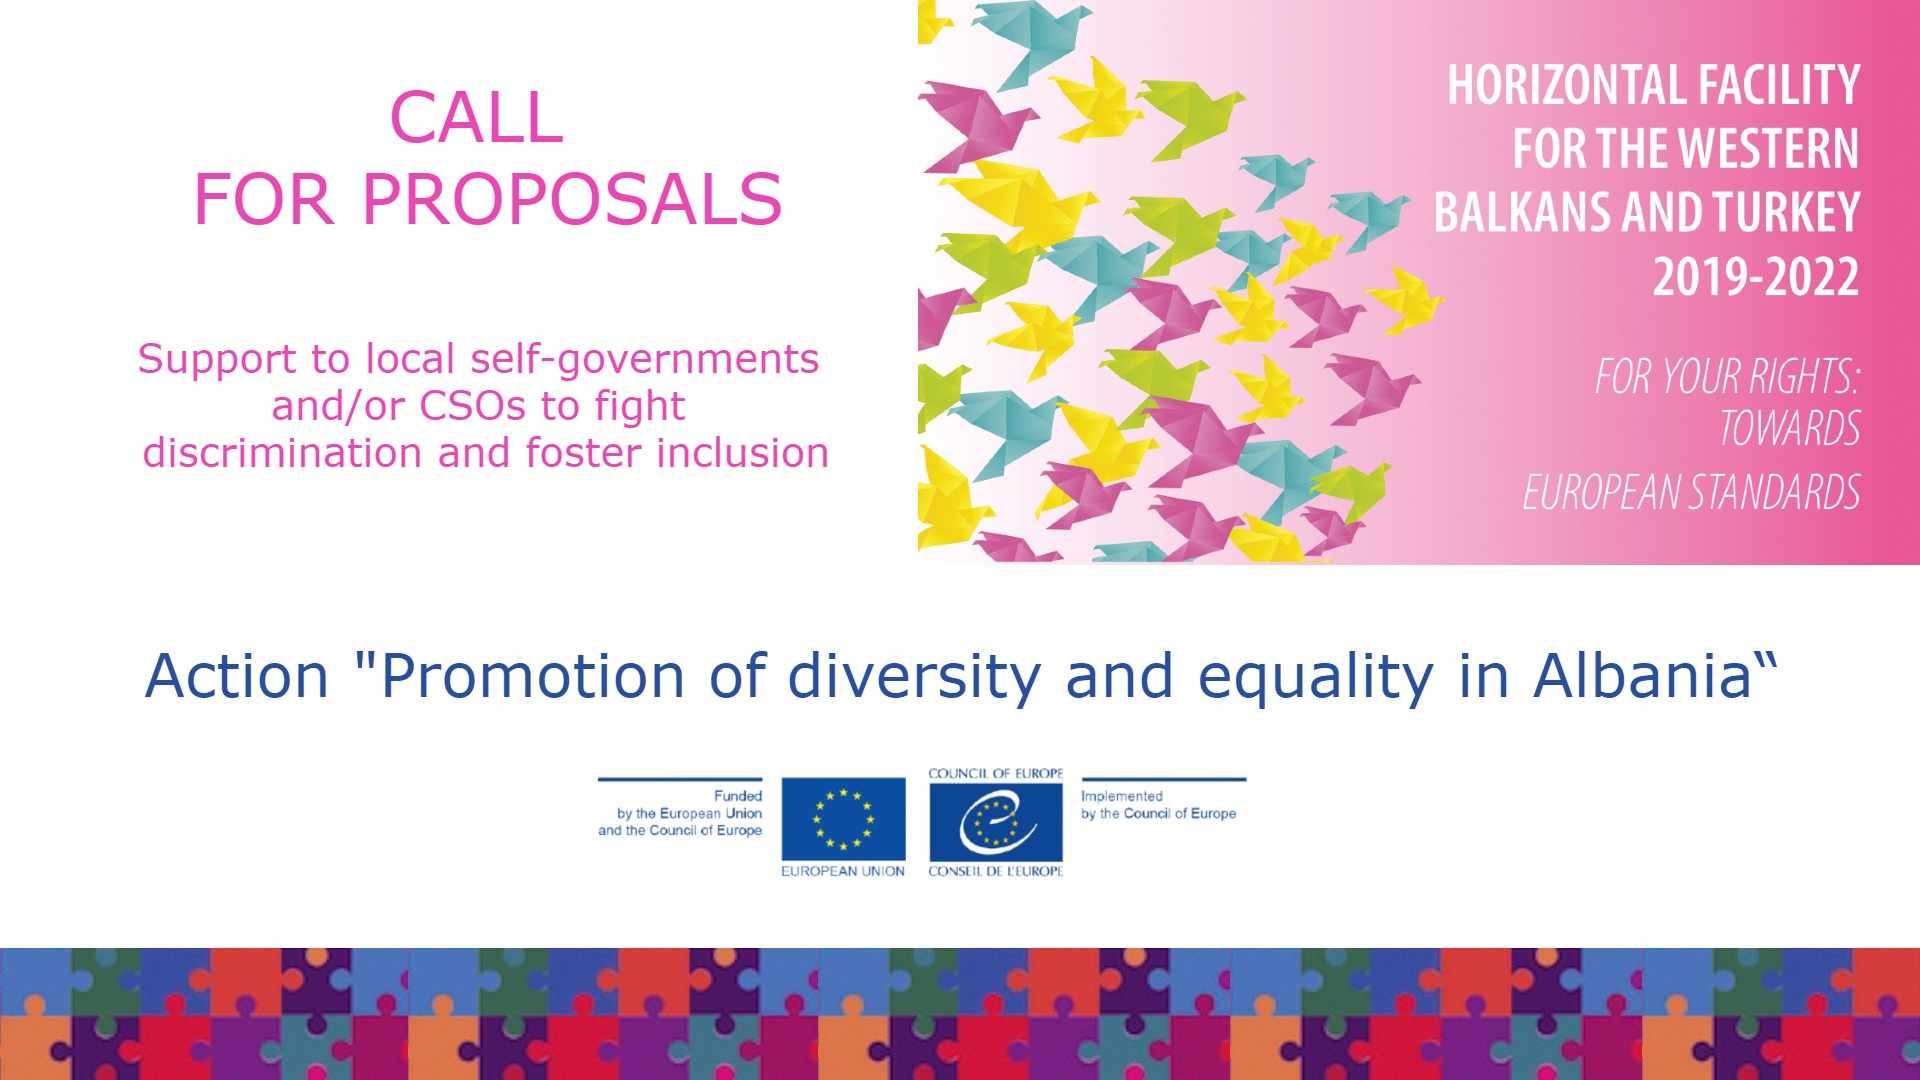 CALL FOR PROPOSALS: Support to local self-governments and/or CSOs for fighting discrimination - “Promotion of diversity and equality in Albania“